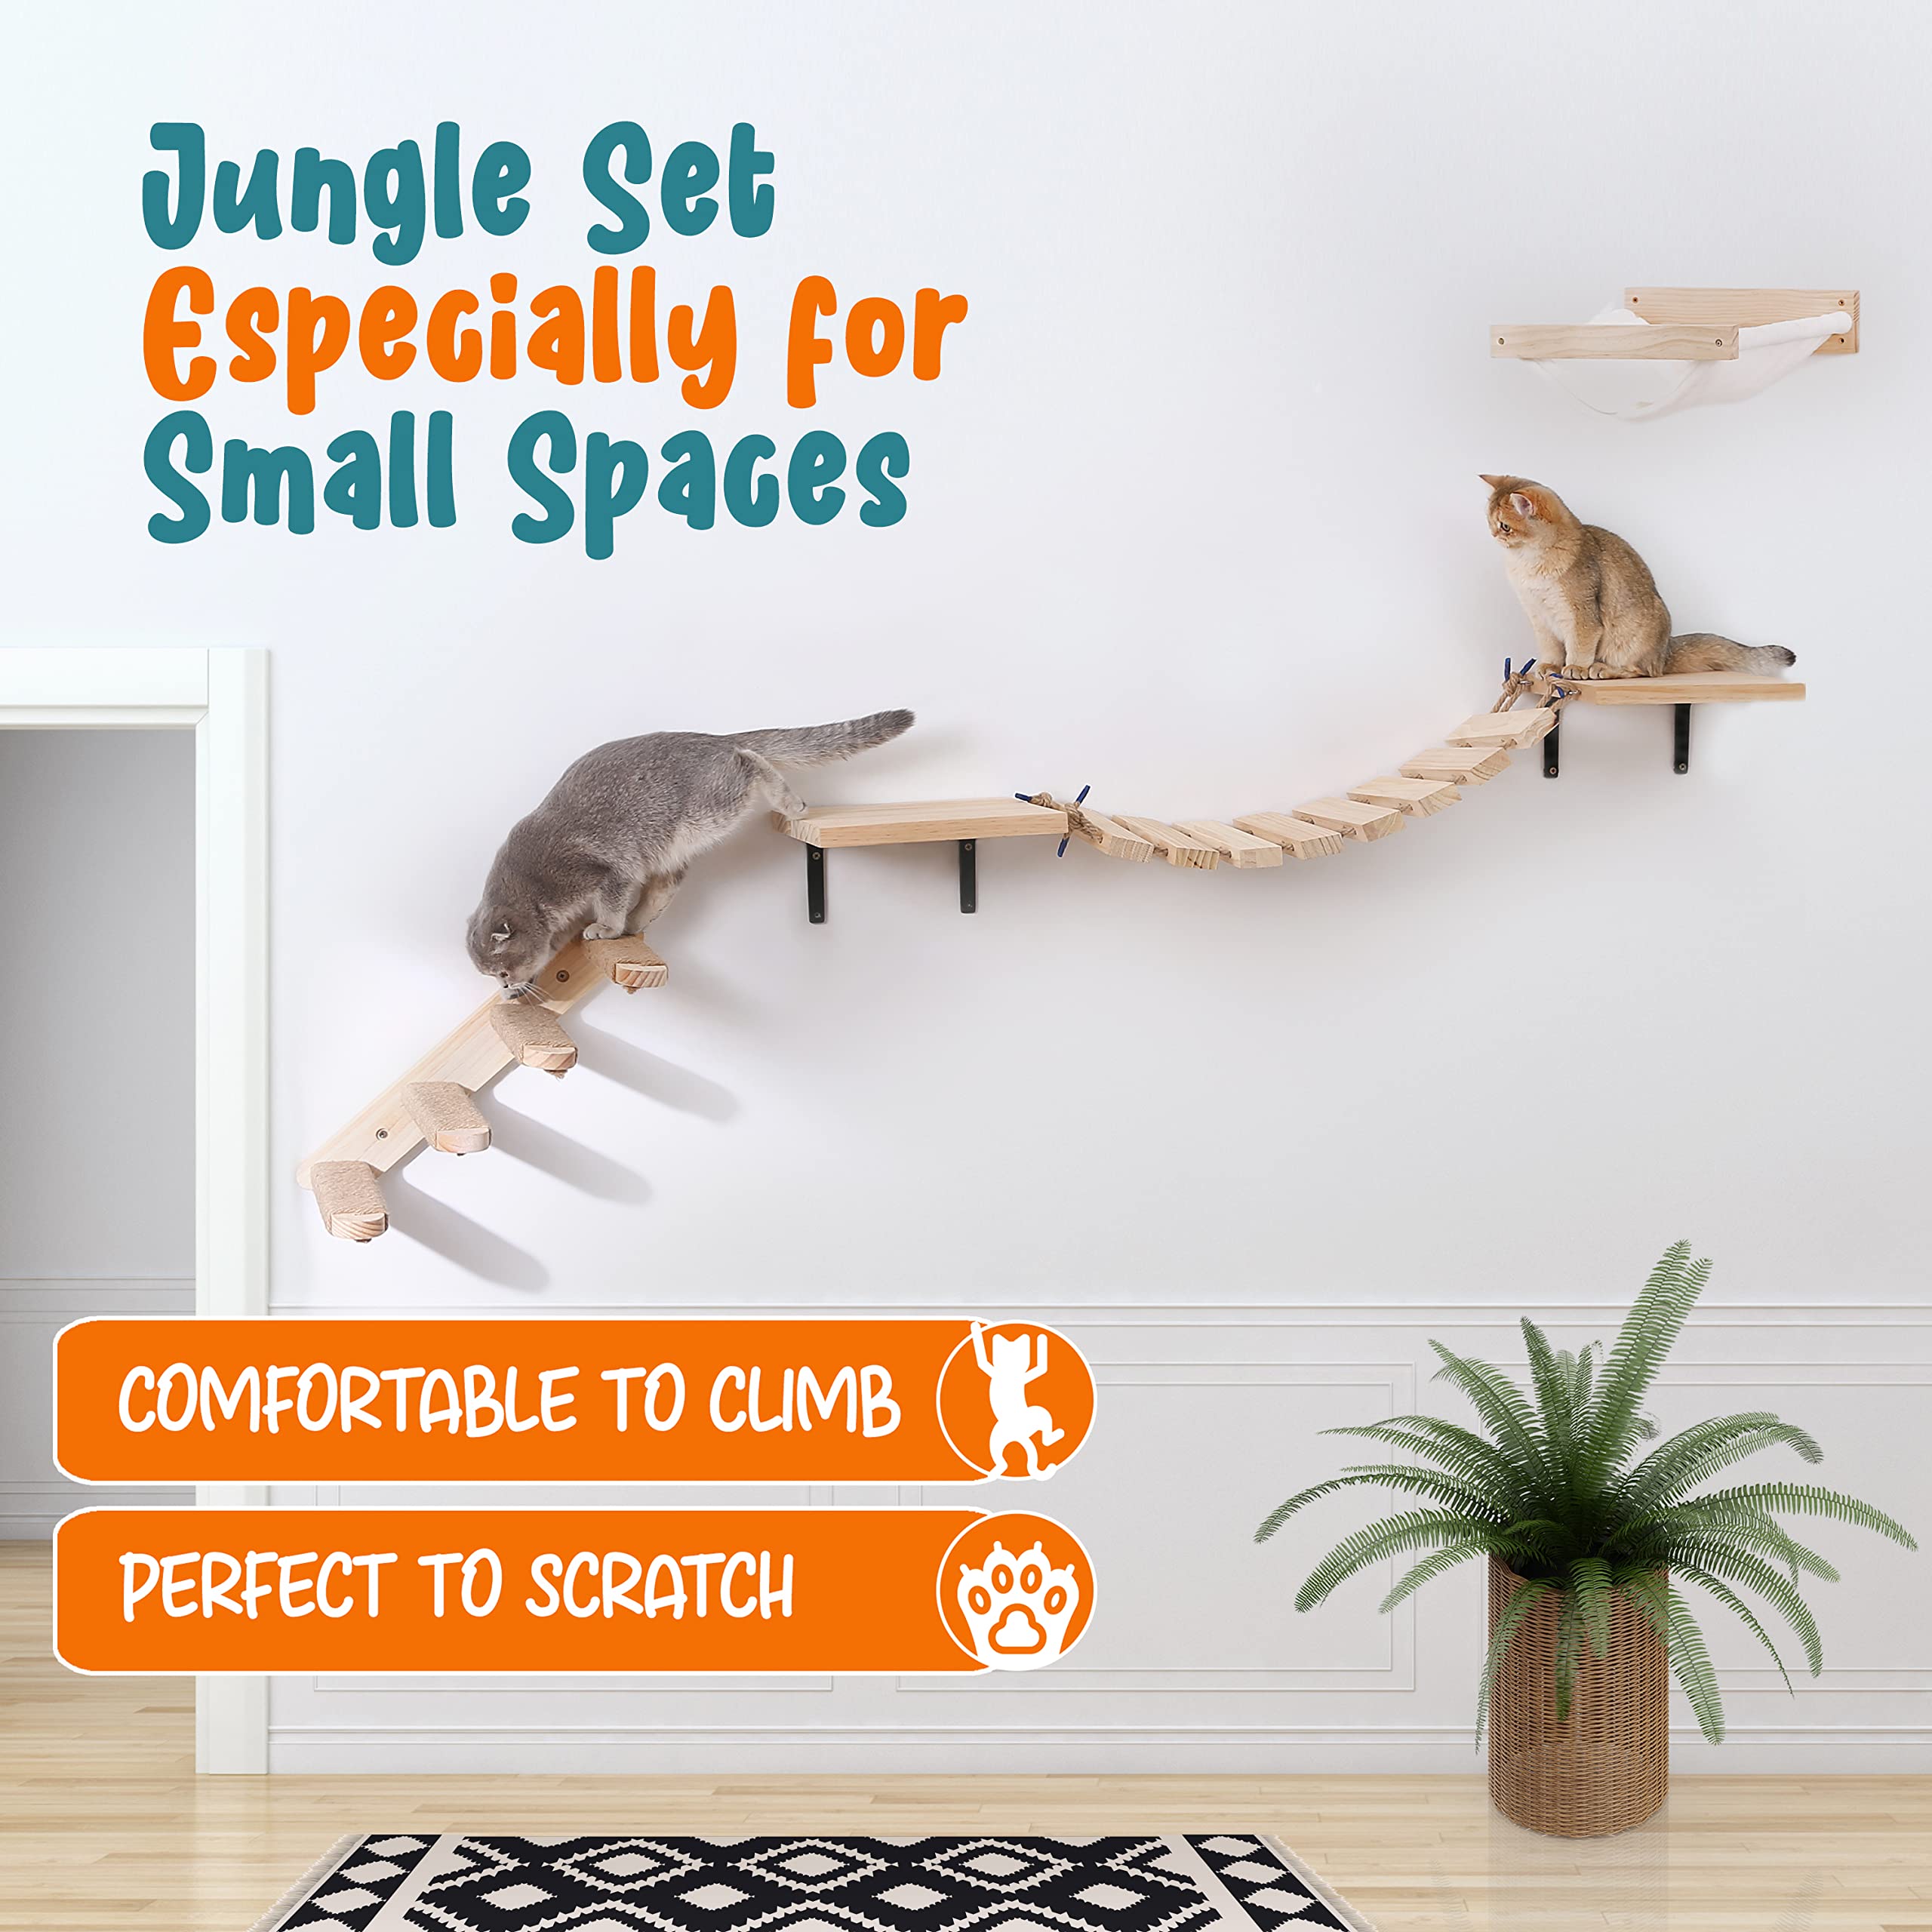 PATHOSIO PETS Cat Wall Jungle Set 2 - Floating Cat Shelves and Perches for Wall, Cat Wall Furniture for Indoor Cats - Includes Cat Bridge, Cat Stairs for Wall, and Cat Wall Hammock for Play and Rest